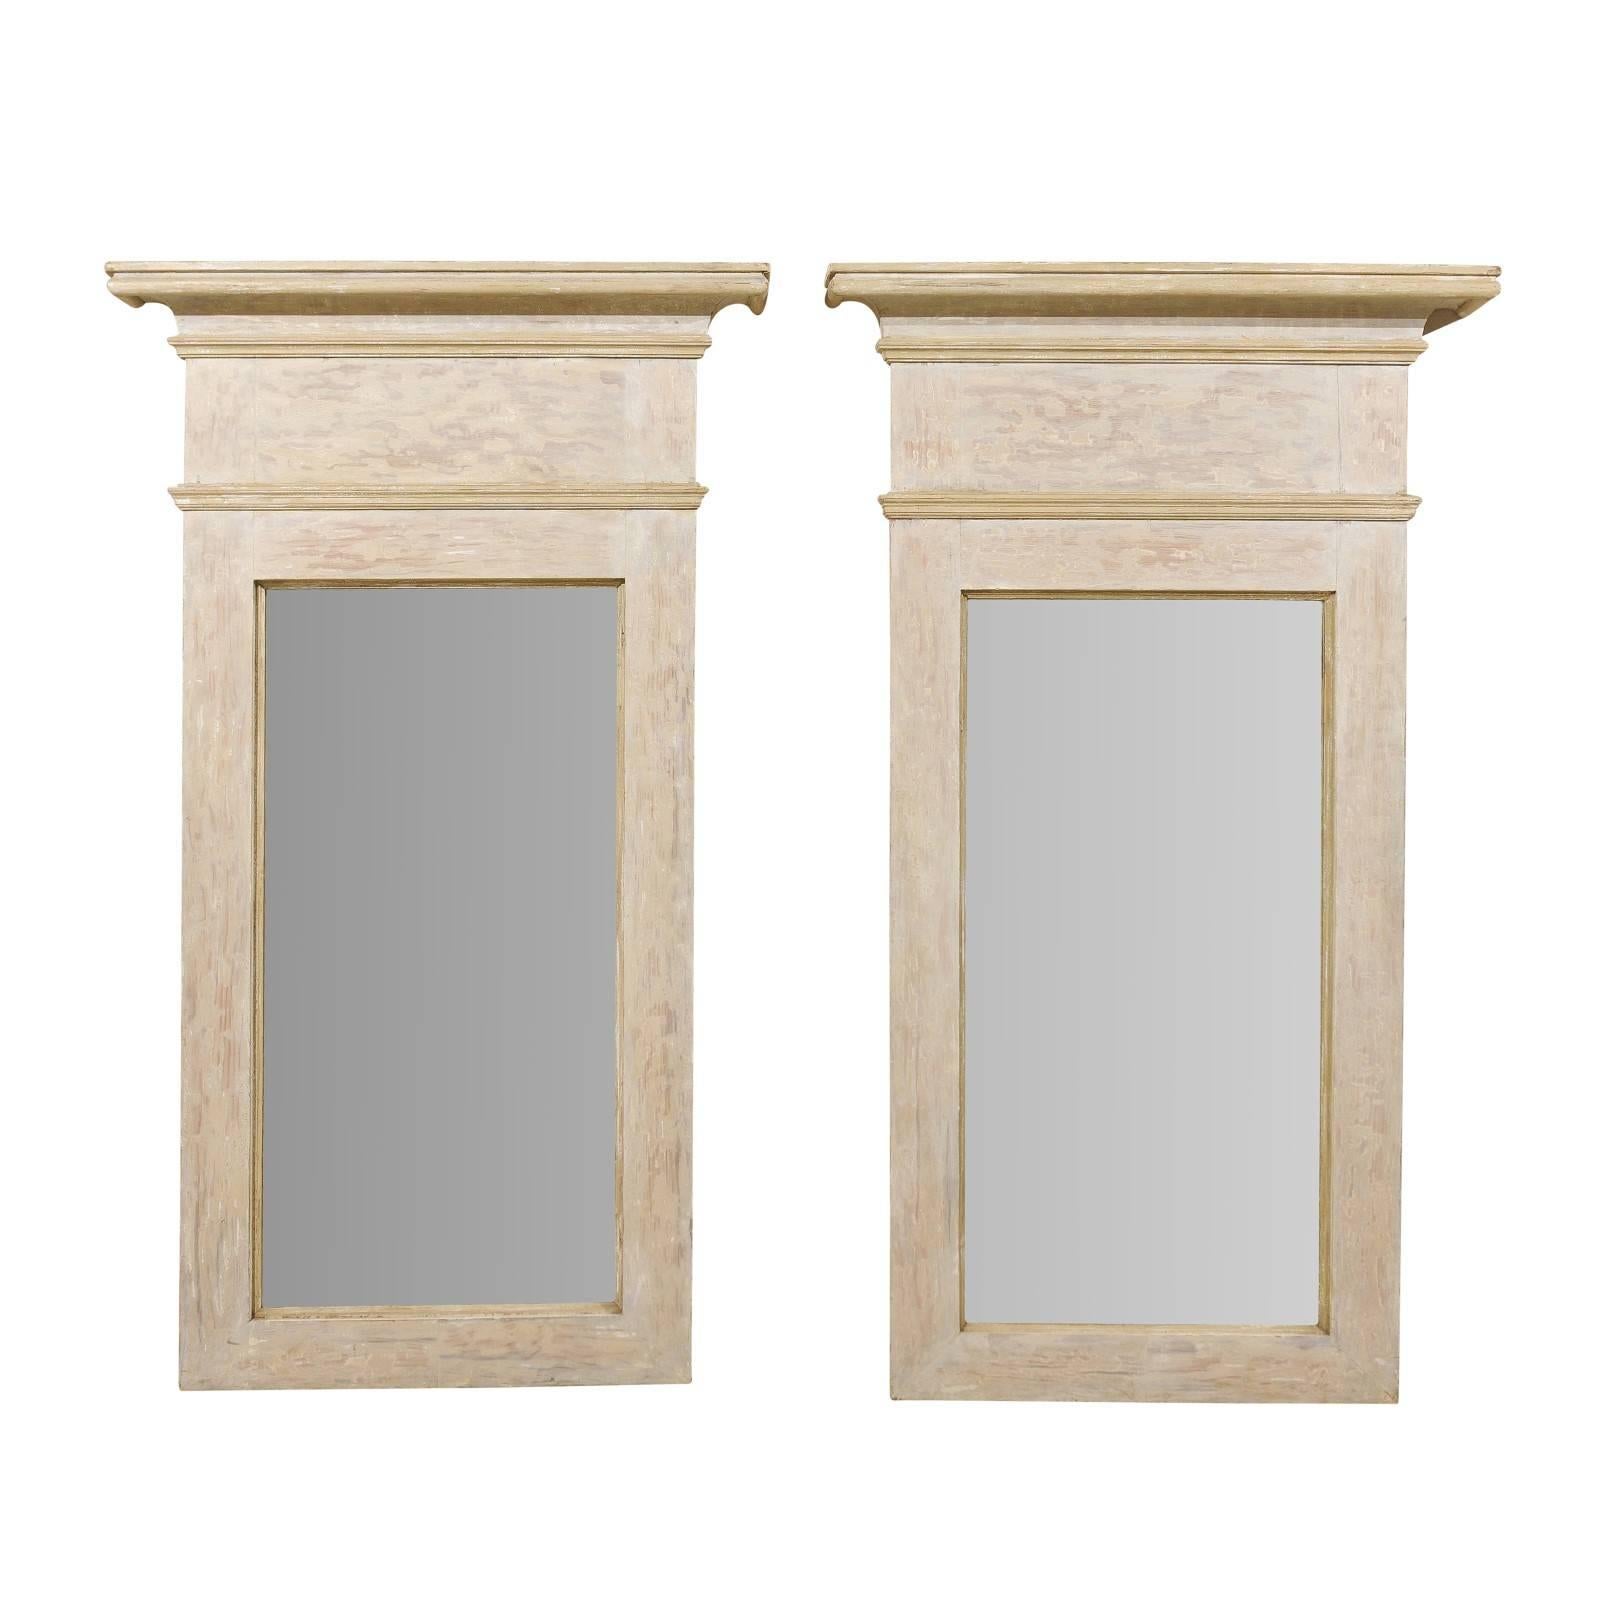 Pair of Large Size Painted Wood Trumeau Mirrors with Scraped Finish For Sale